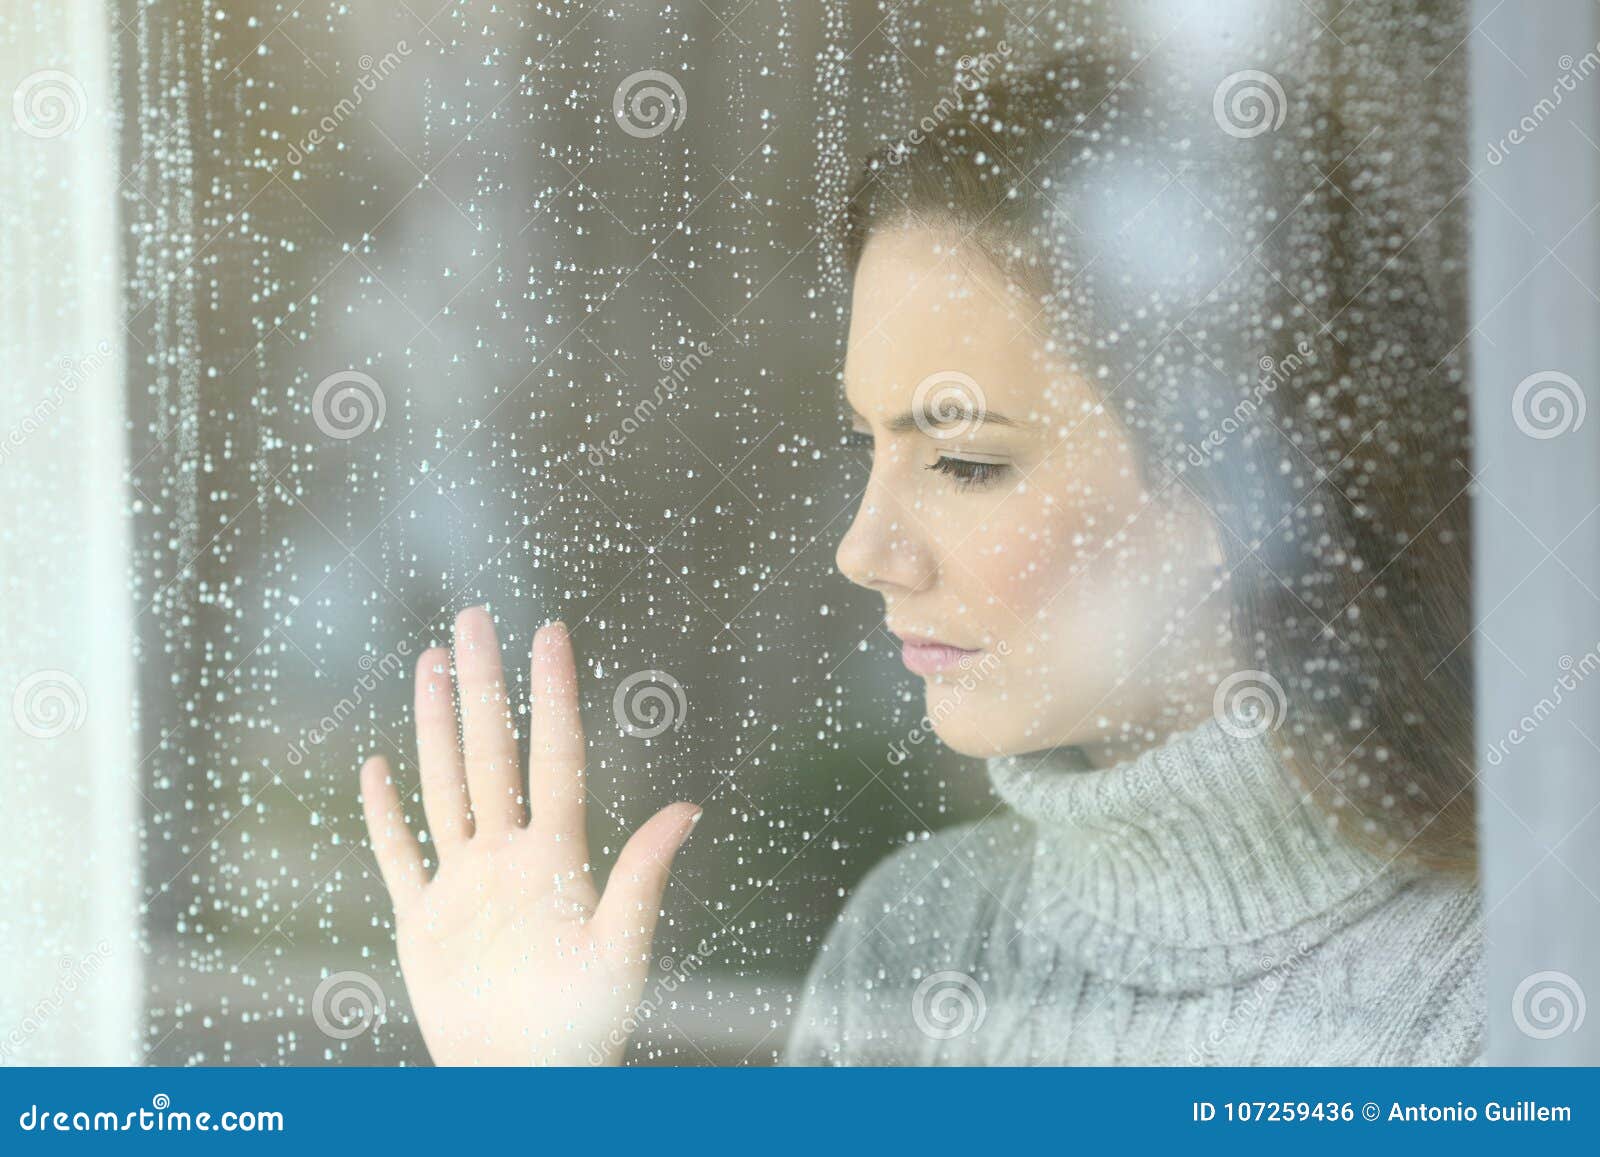 sad girl looking through a window in a rainy day